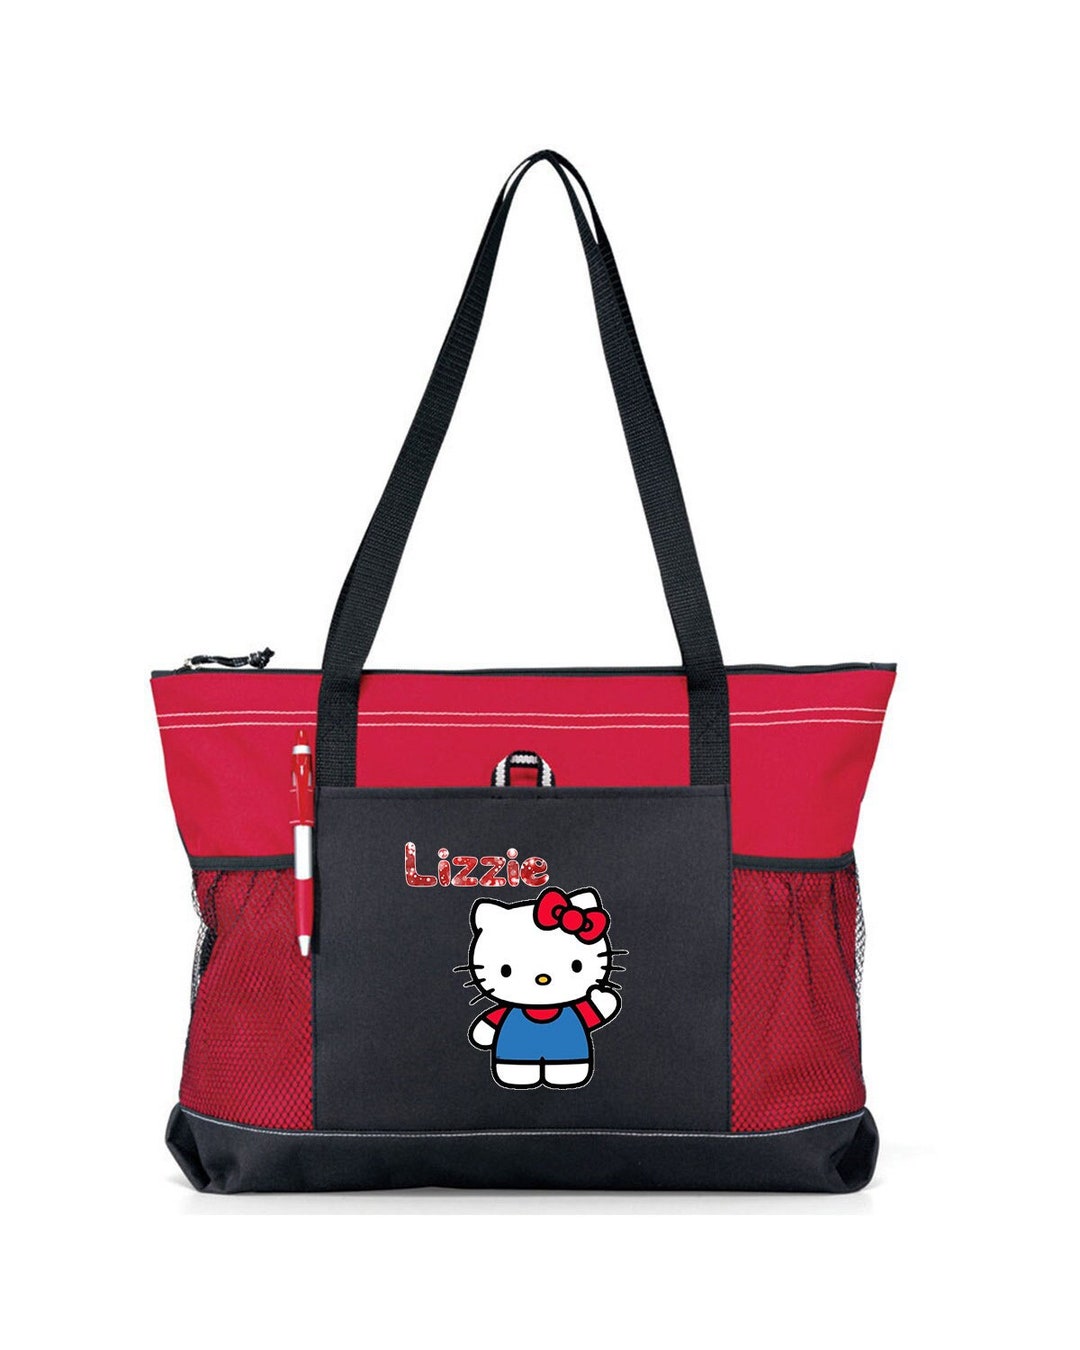 Personalized Glitzy Glow Hello Kitty Tote Bag, Available in 7 Colors - Etsy